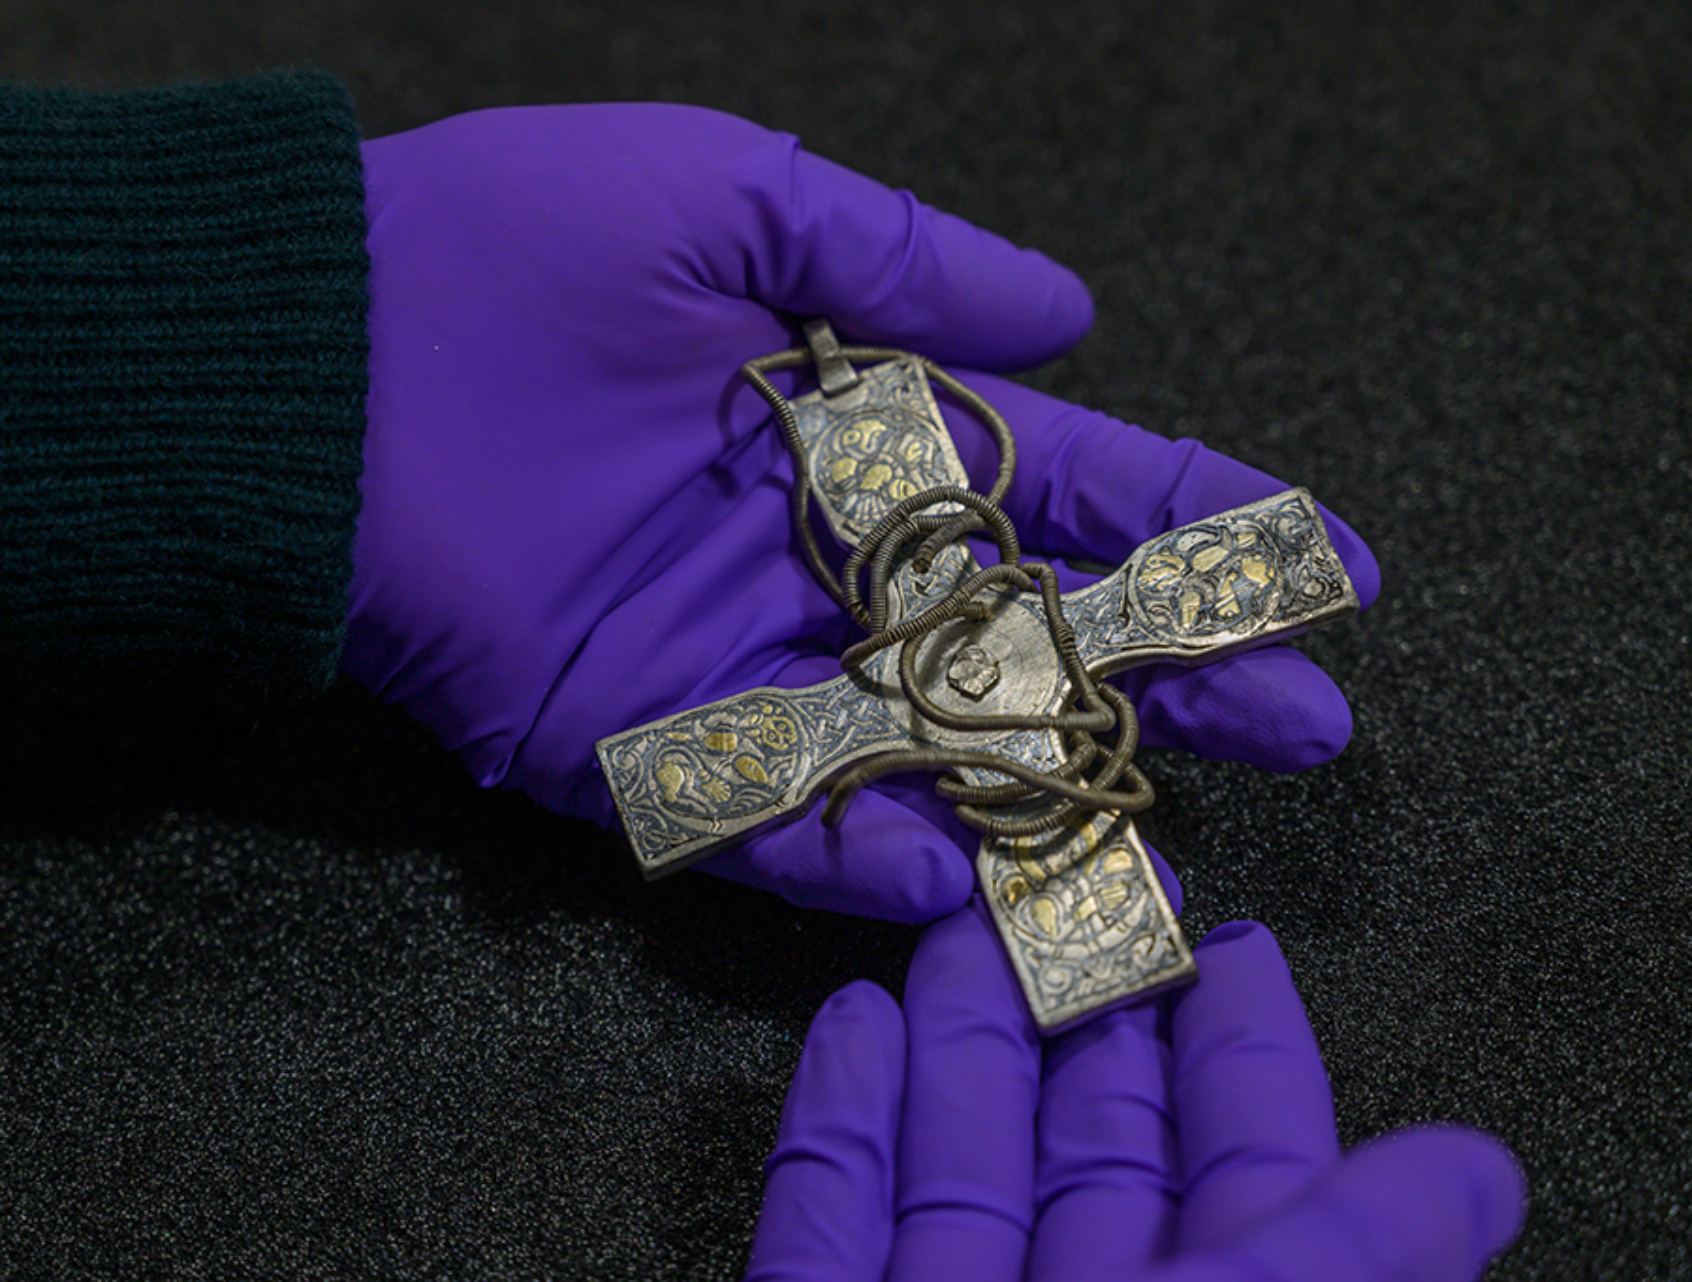 Ornamented silver pectoral cross with wire chain from the viking age Galloway Hoard.